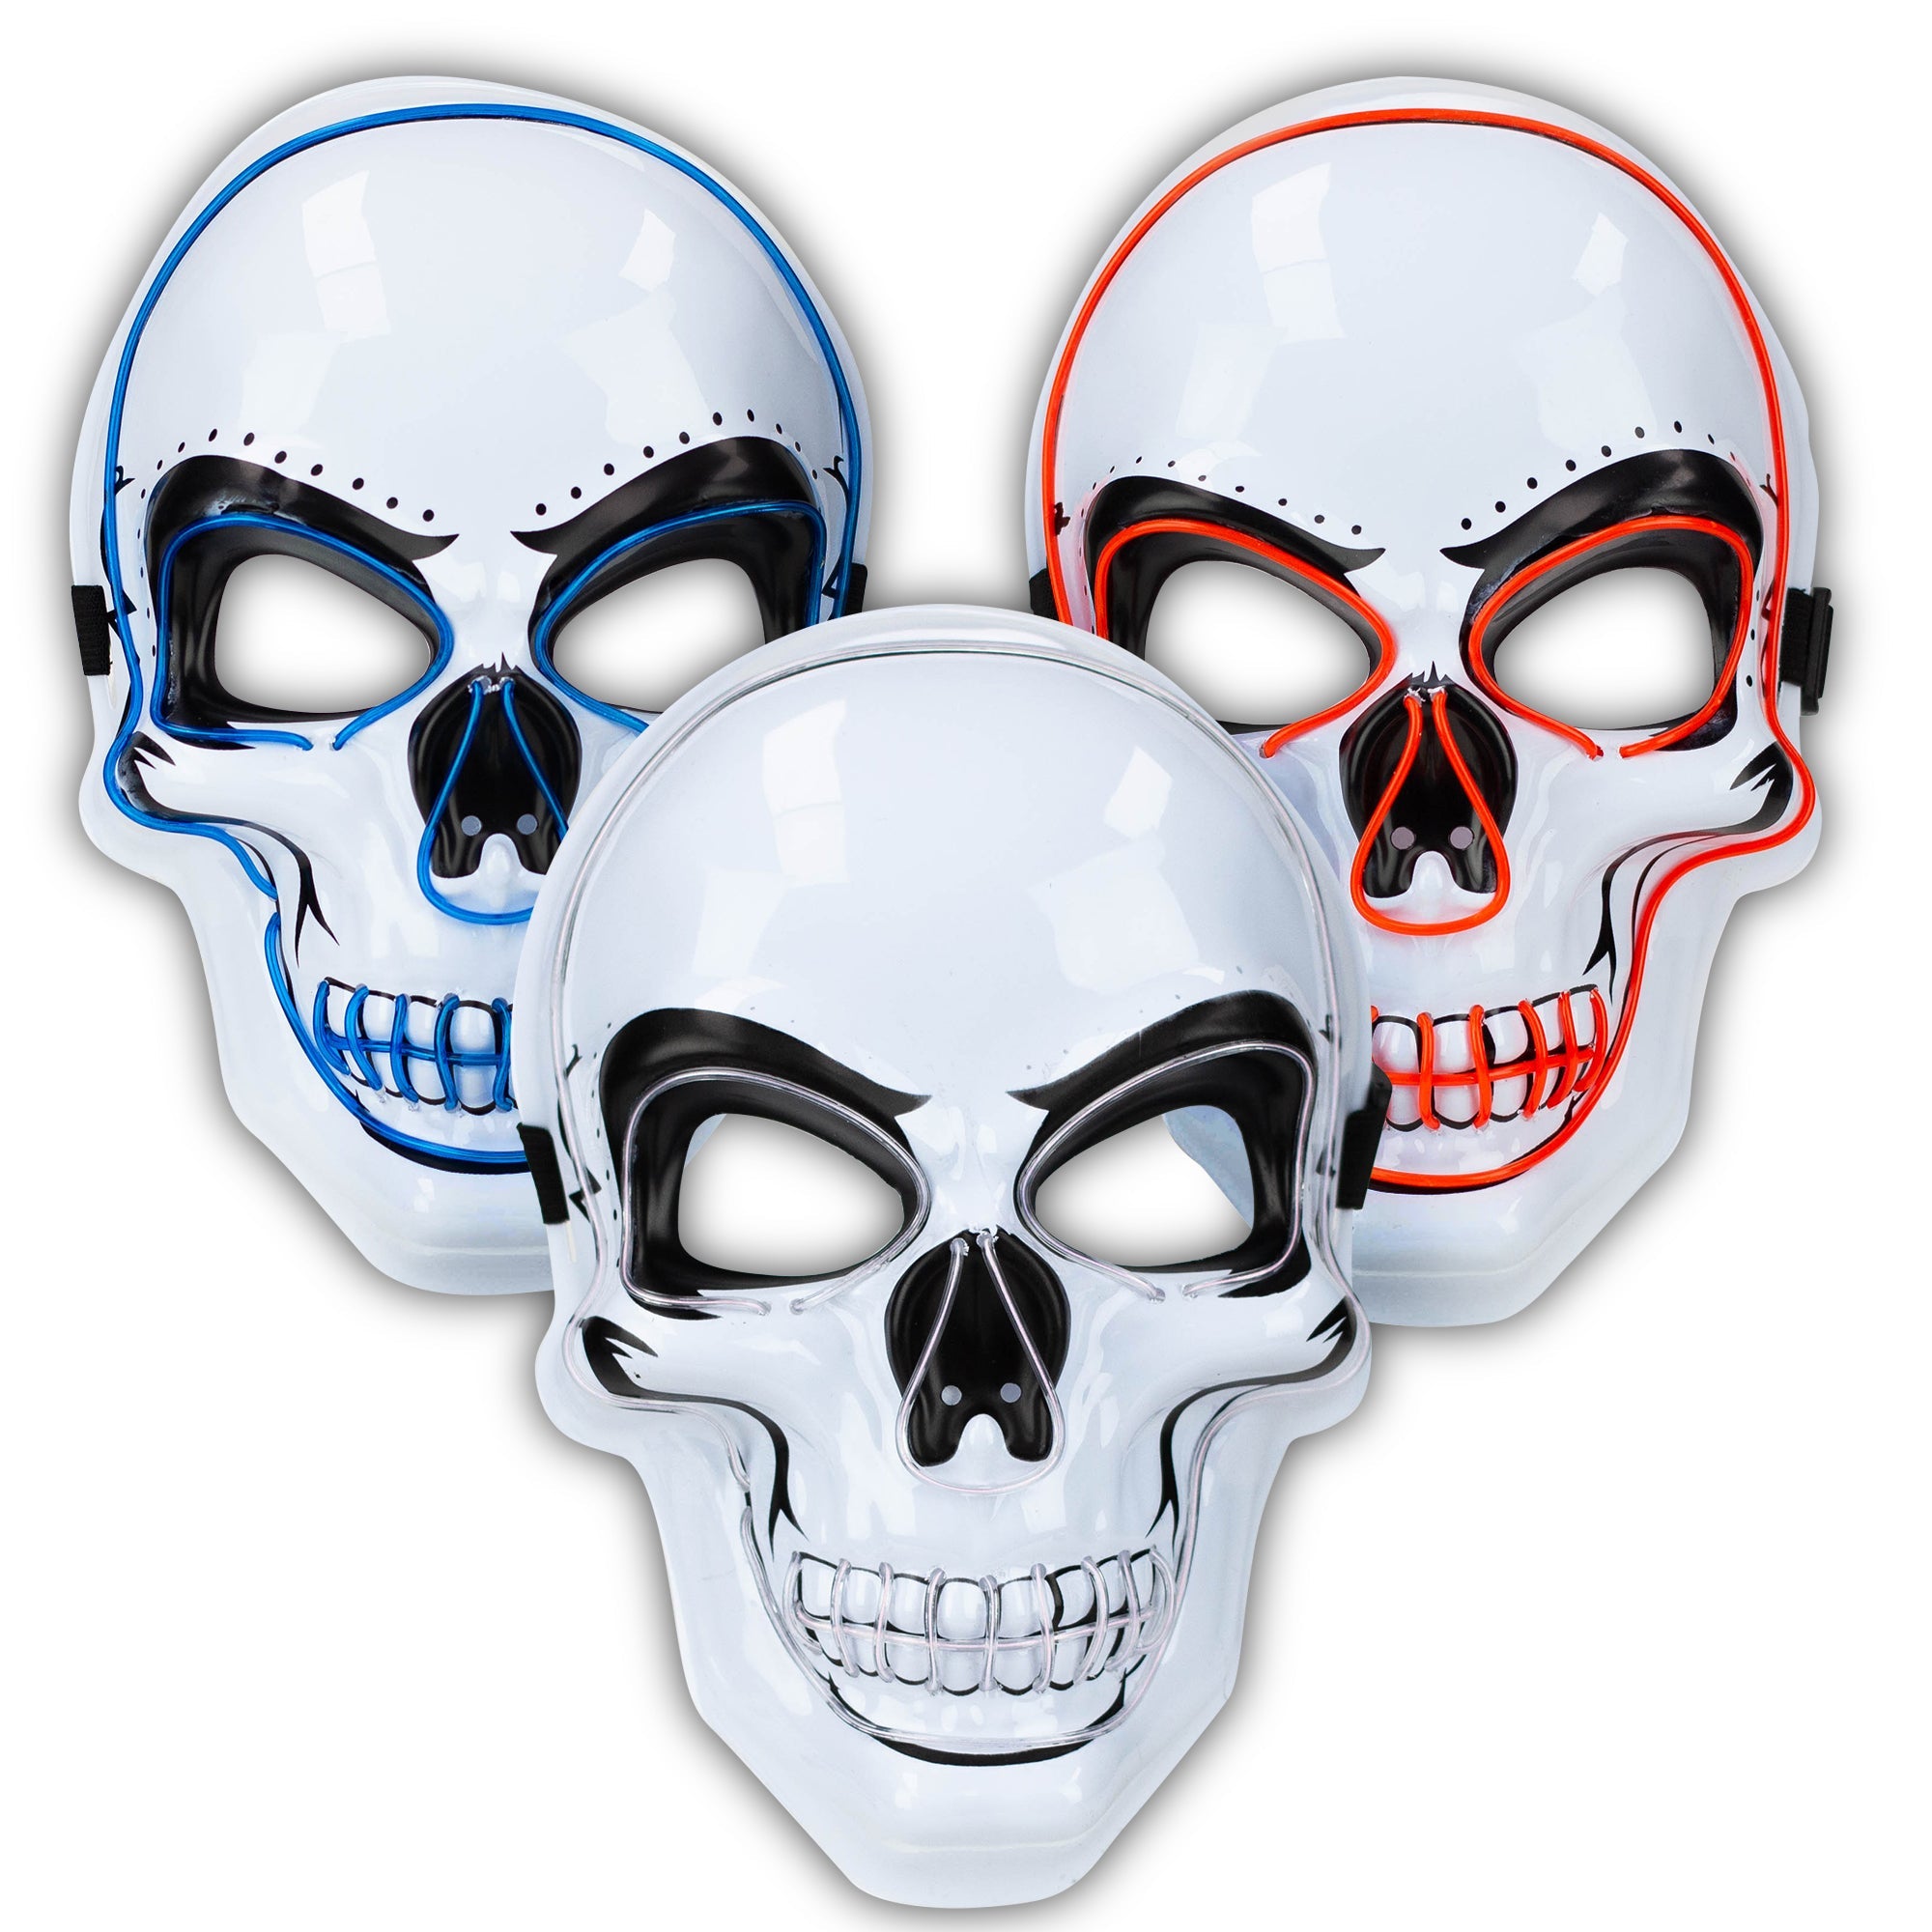 LED Neon Skull Mask for party or Halloween Costume_1